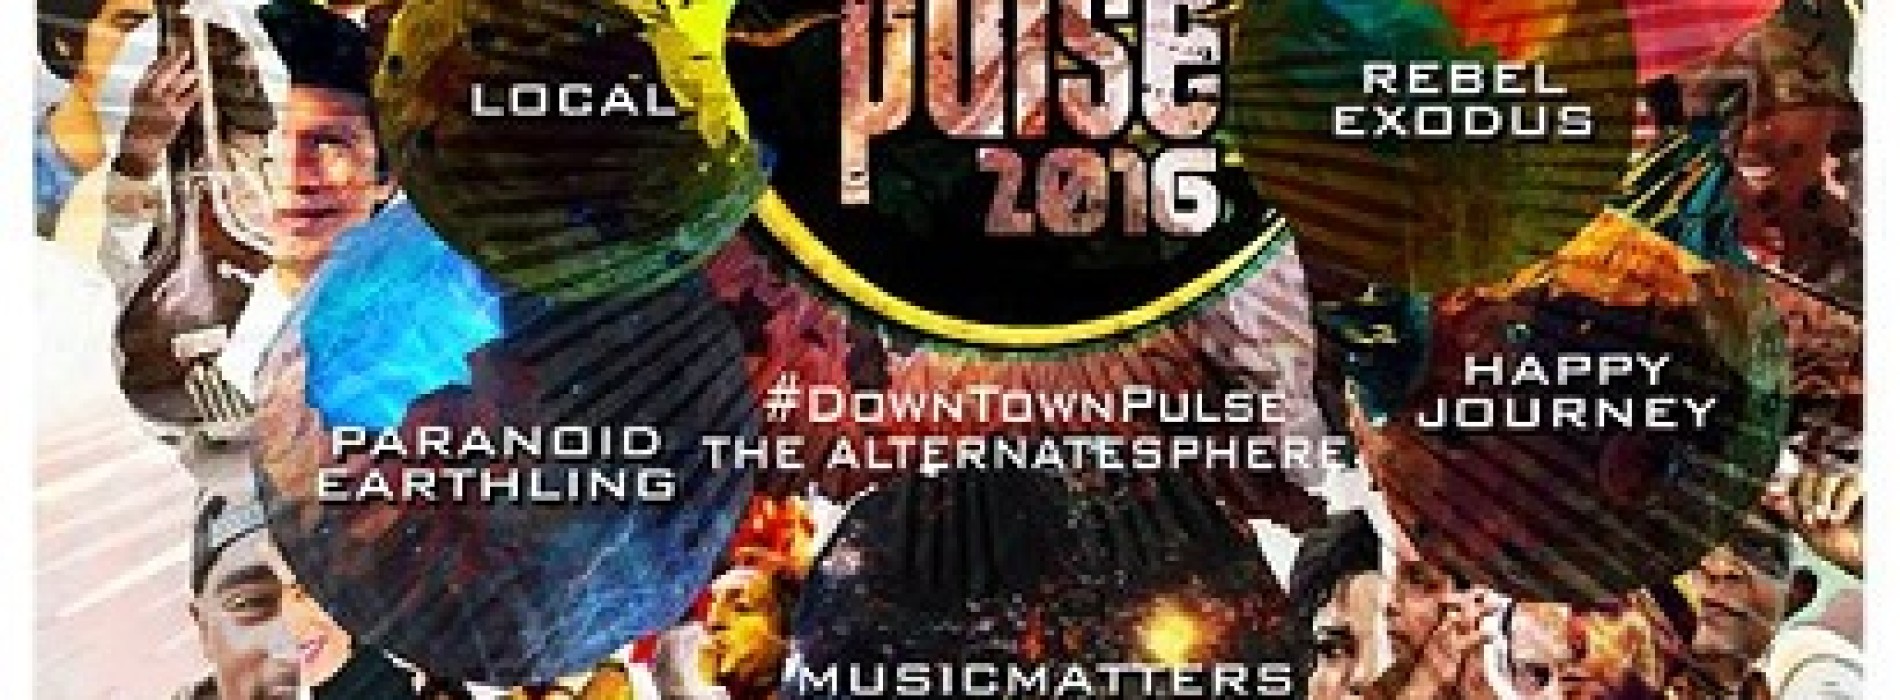 Down Town Pulse : Gearing Up